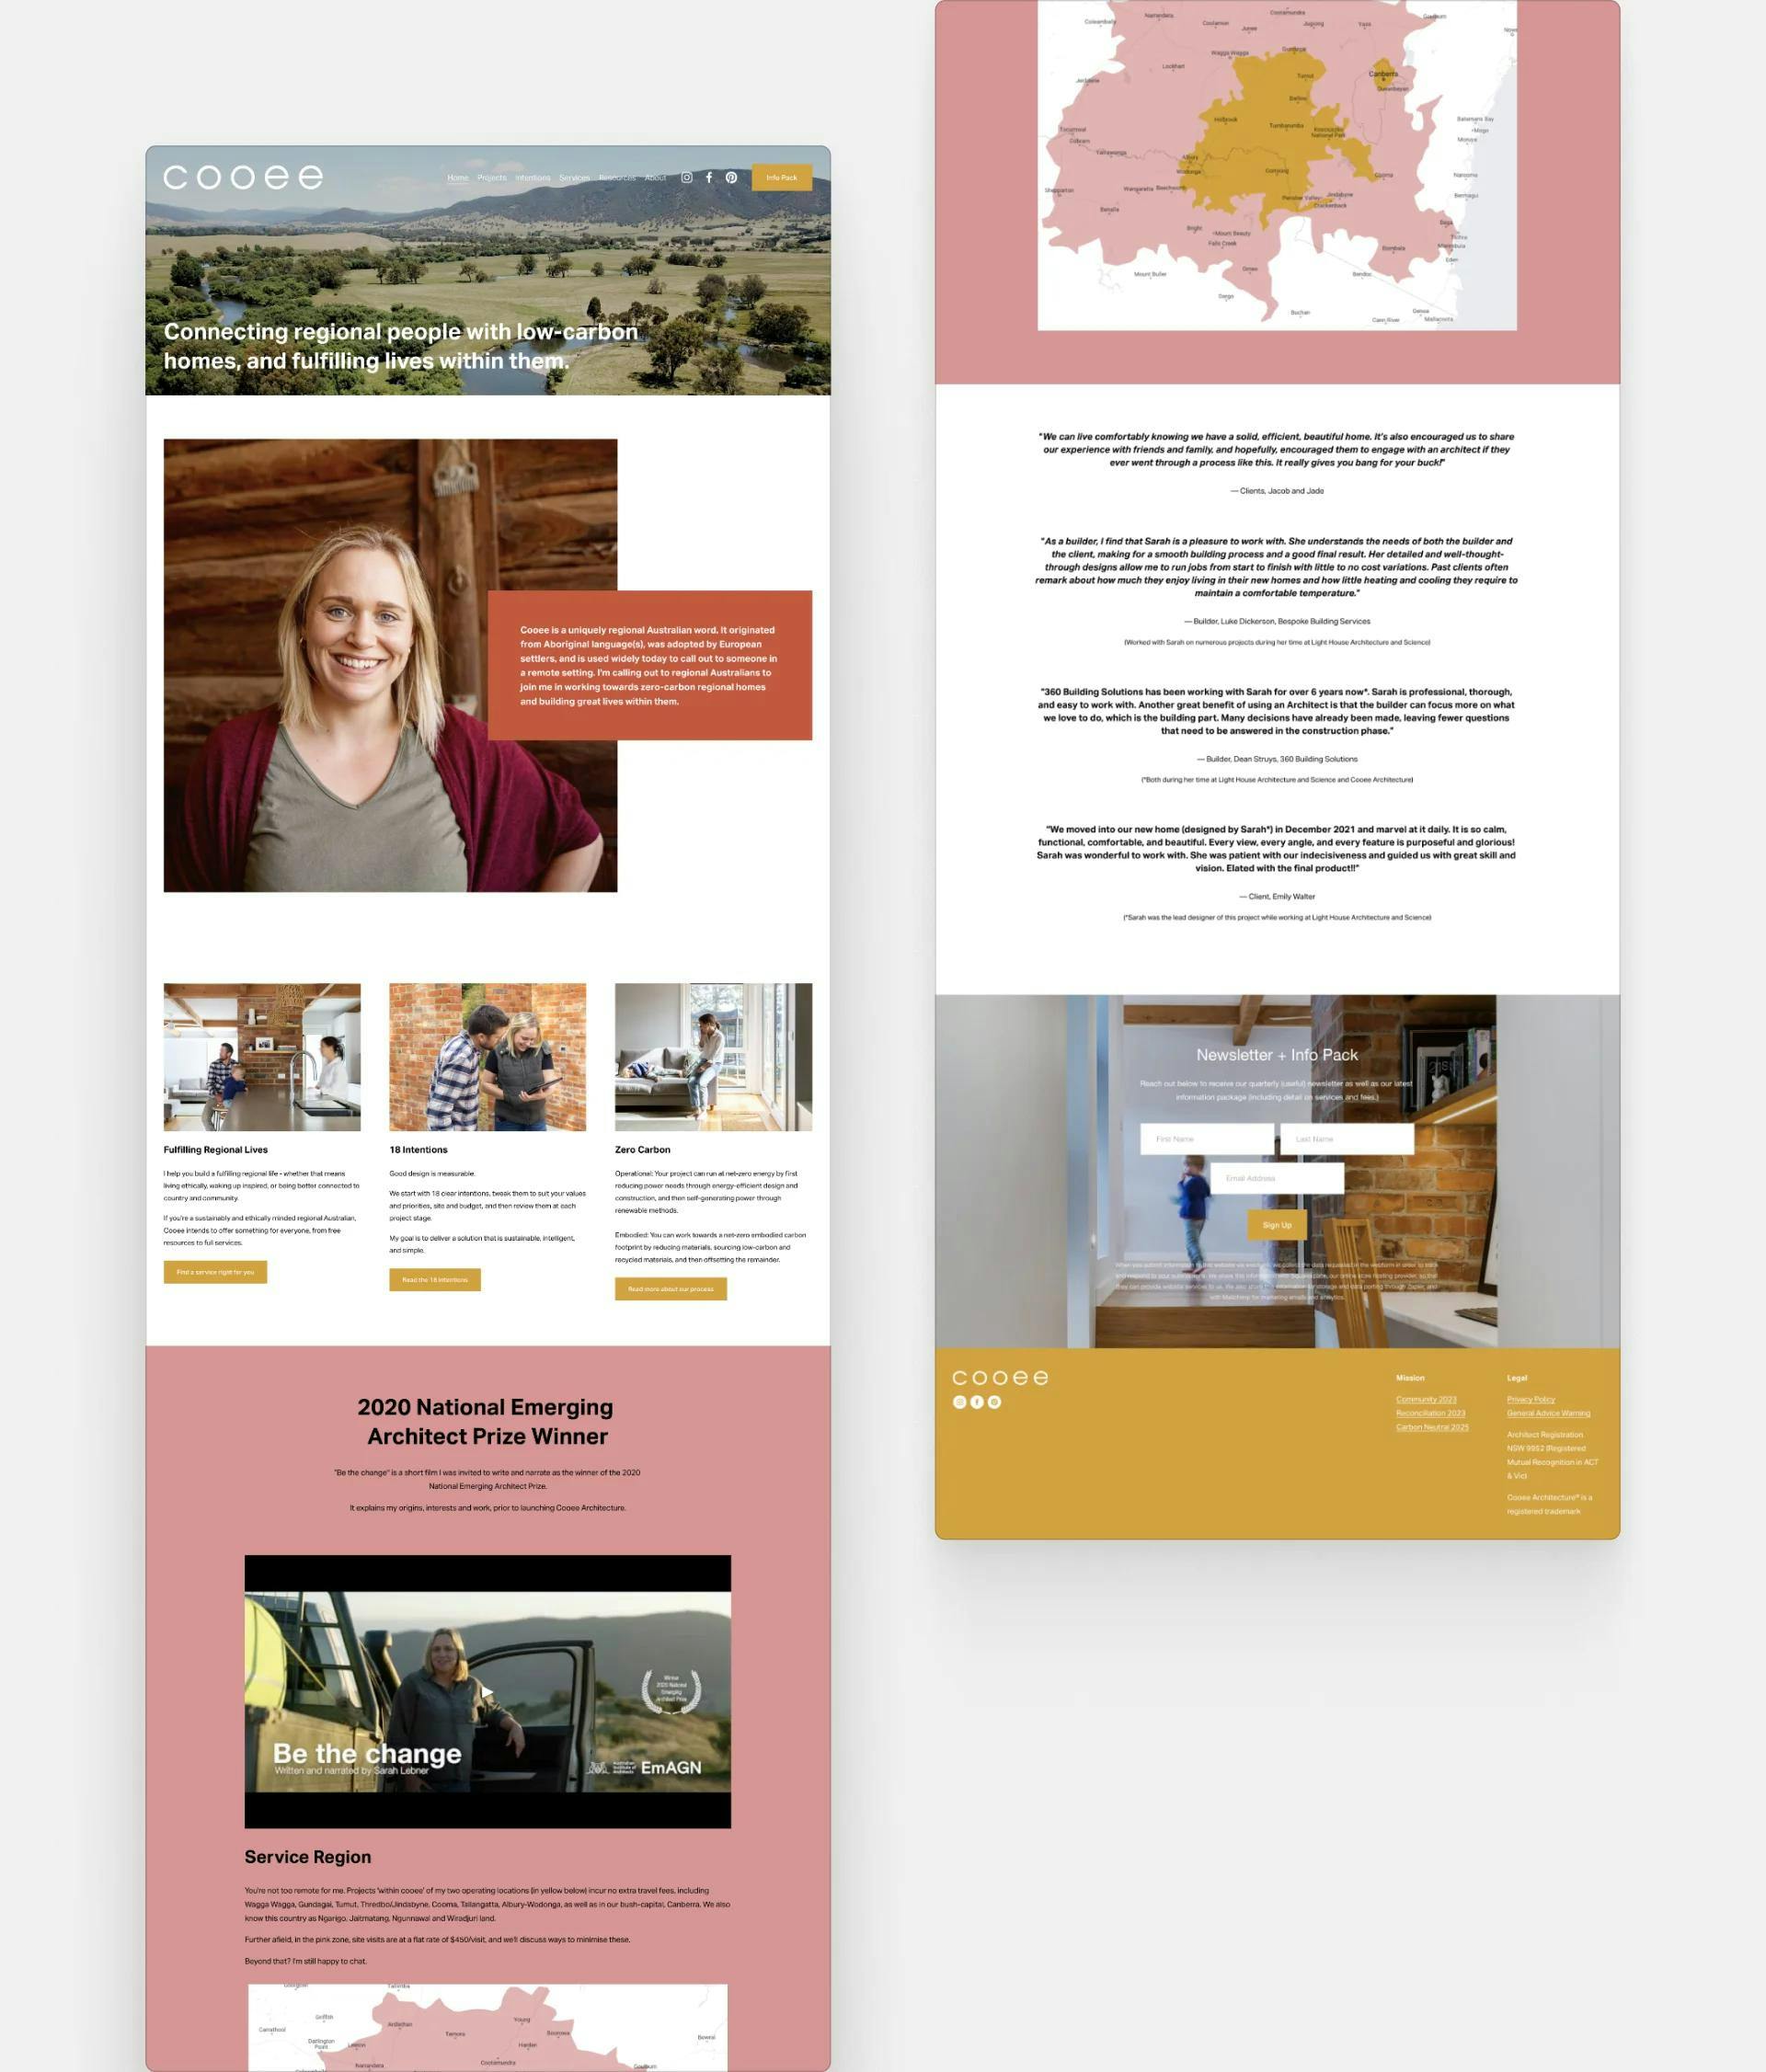 The home page of the portfolio website of Sarah Lebner